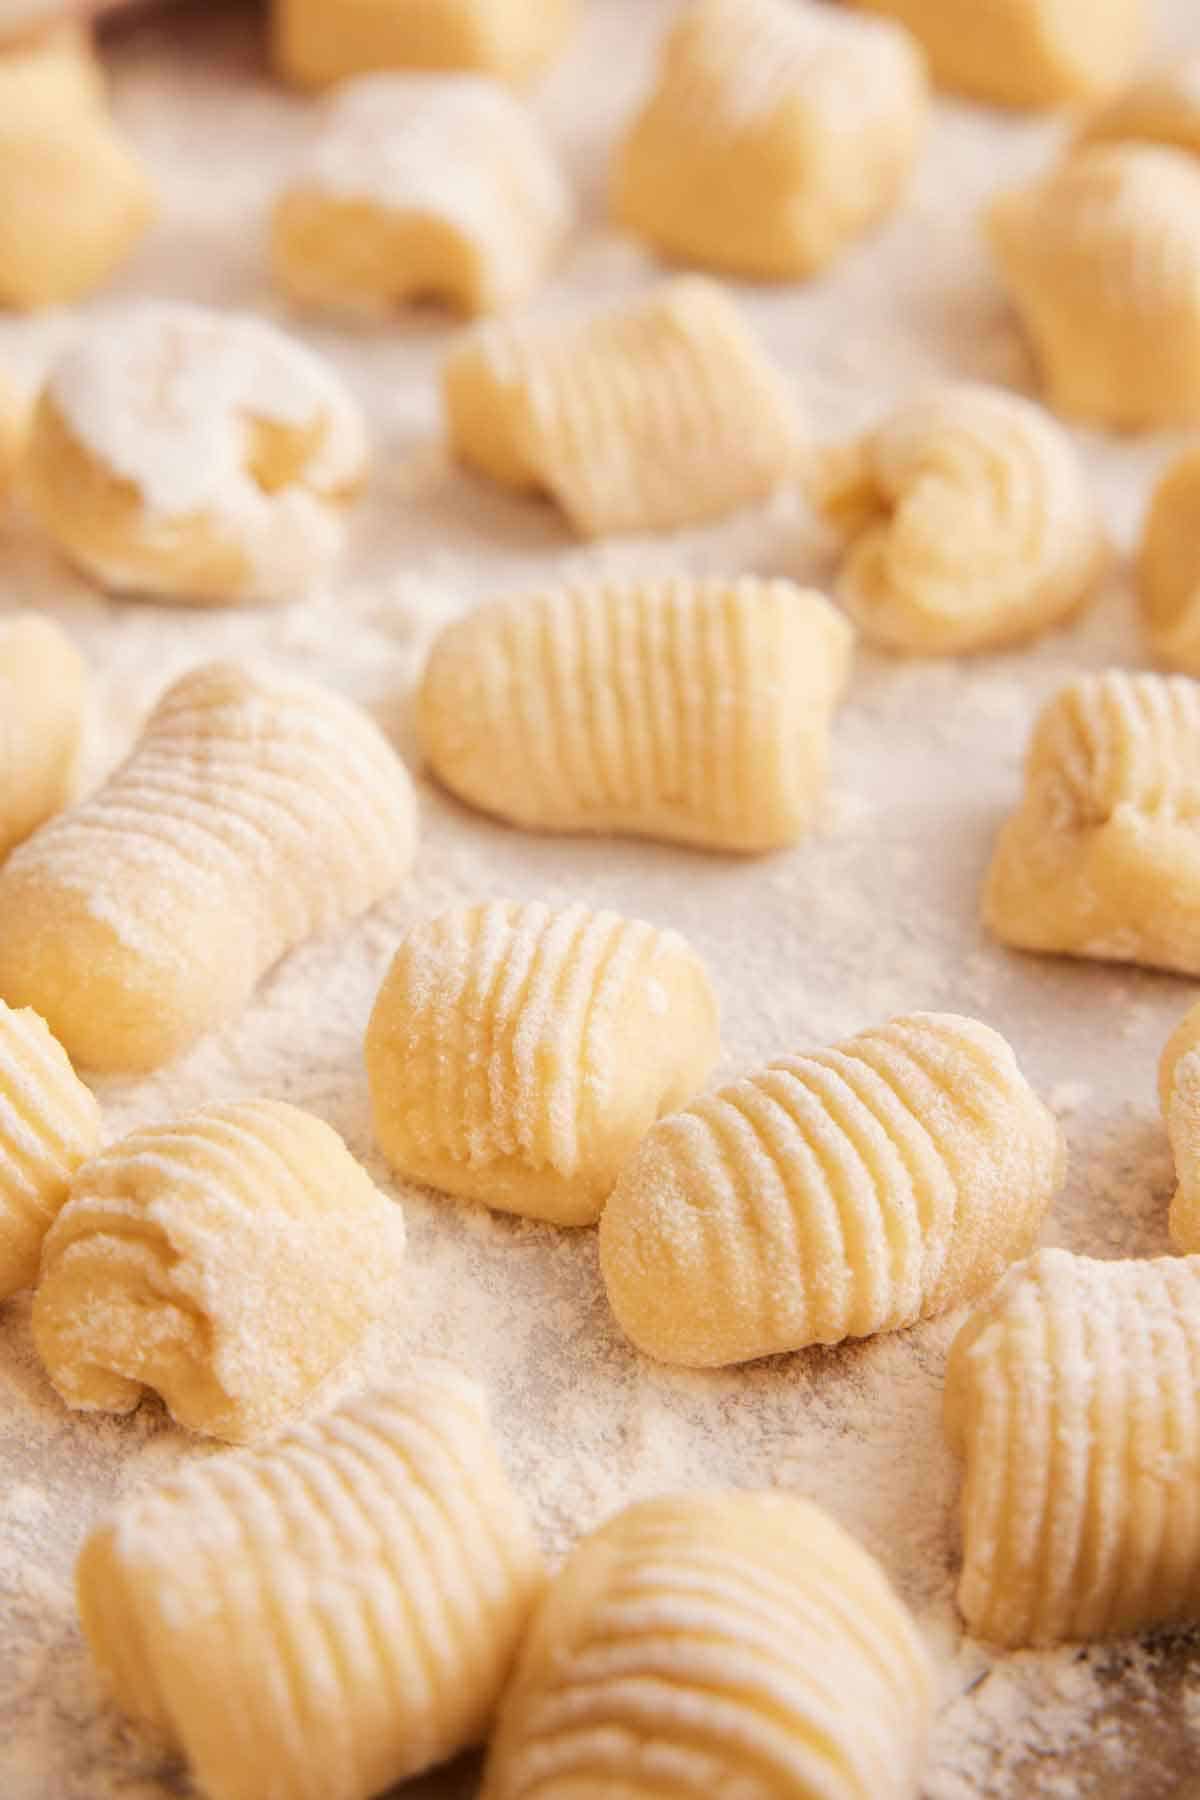 Multiple pieces of rolled gnocchi dough coated in a light layer of flour.